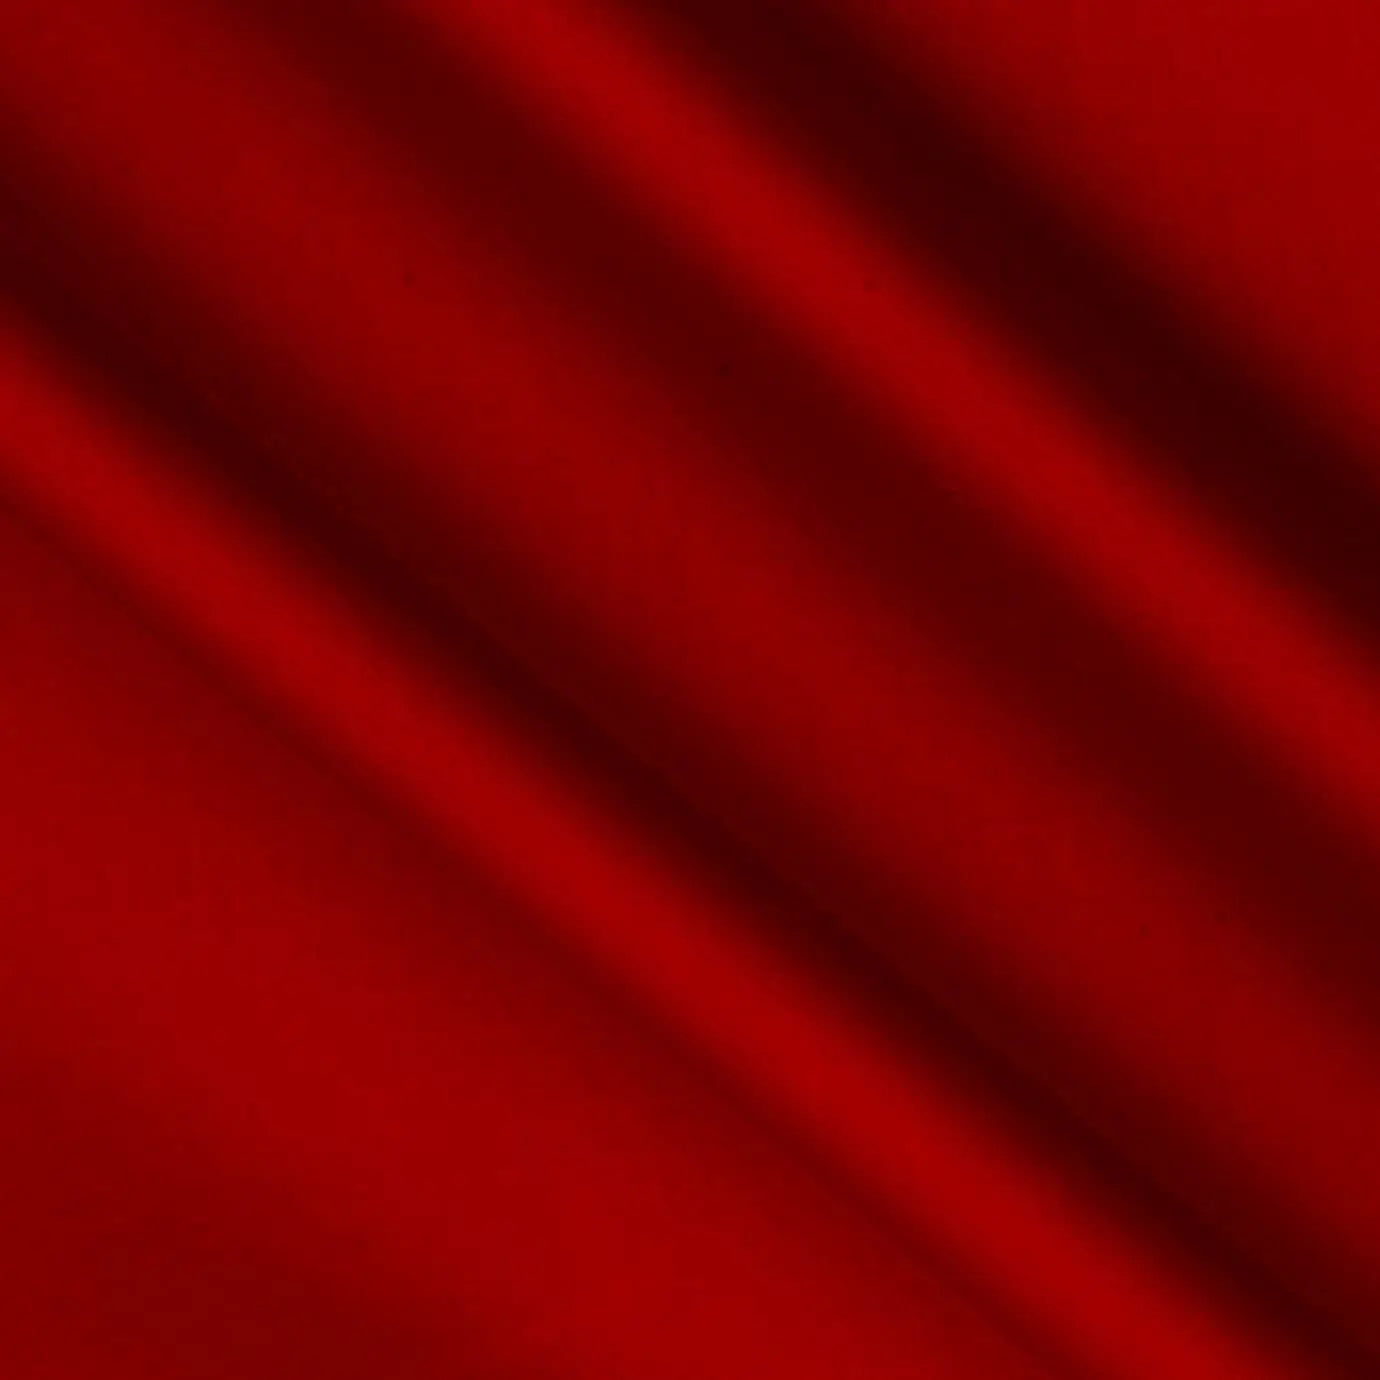 Red Scarlet Cotton Sateen Wideback Fabric per yard - Linda's Electric Quilters